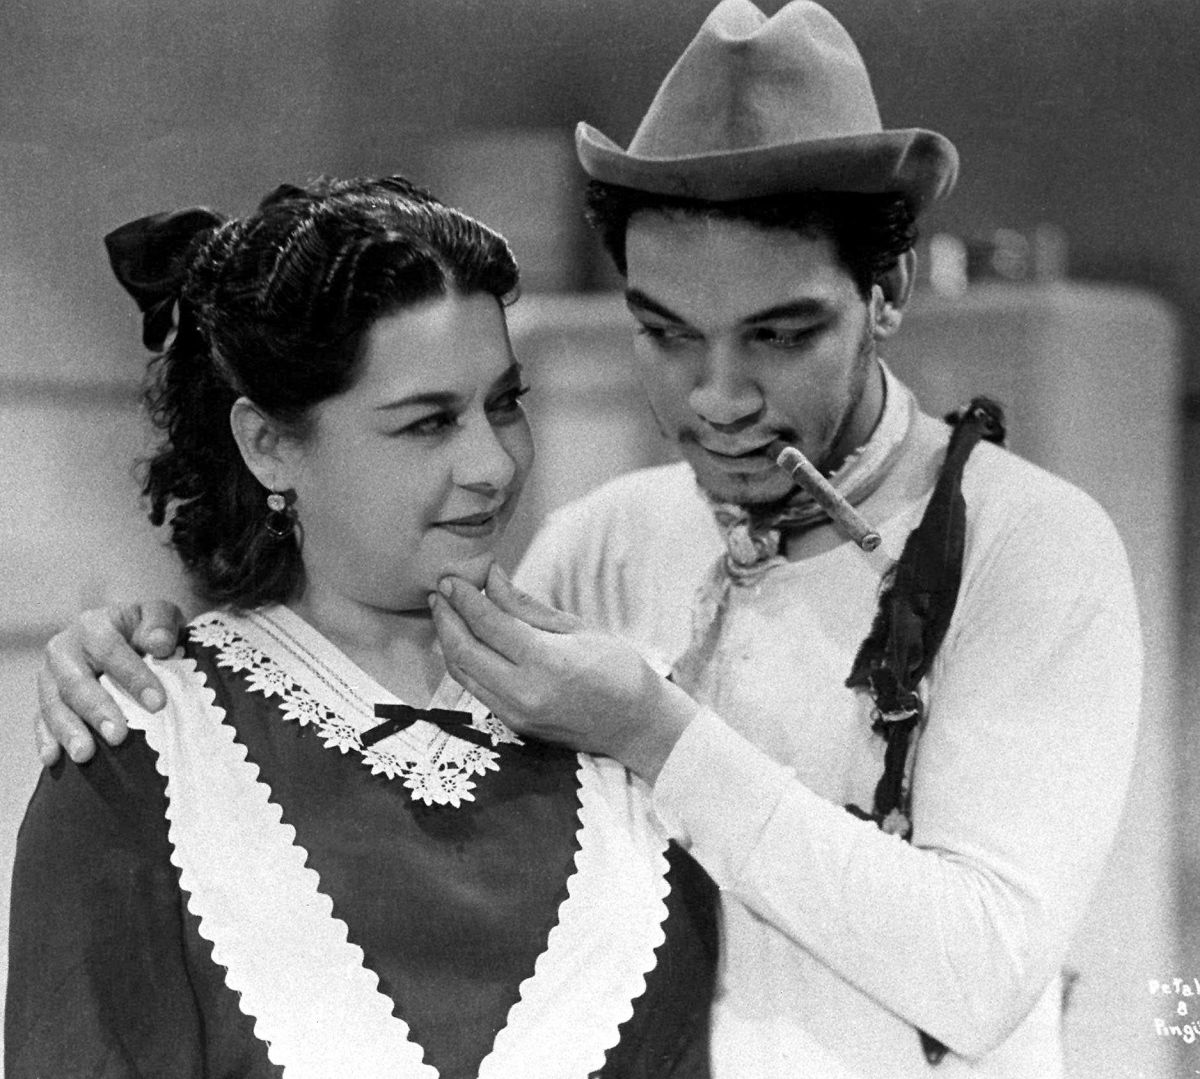 Relive the iconic phrases of Mario Moreno “Cantinflas”